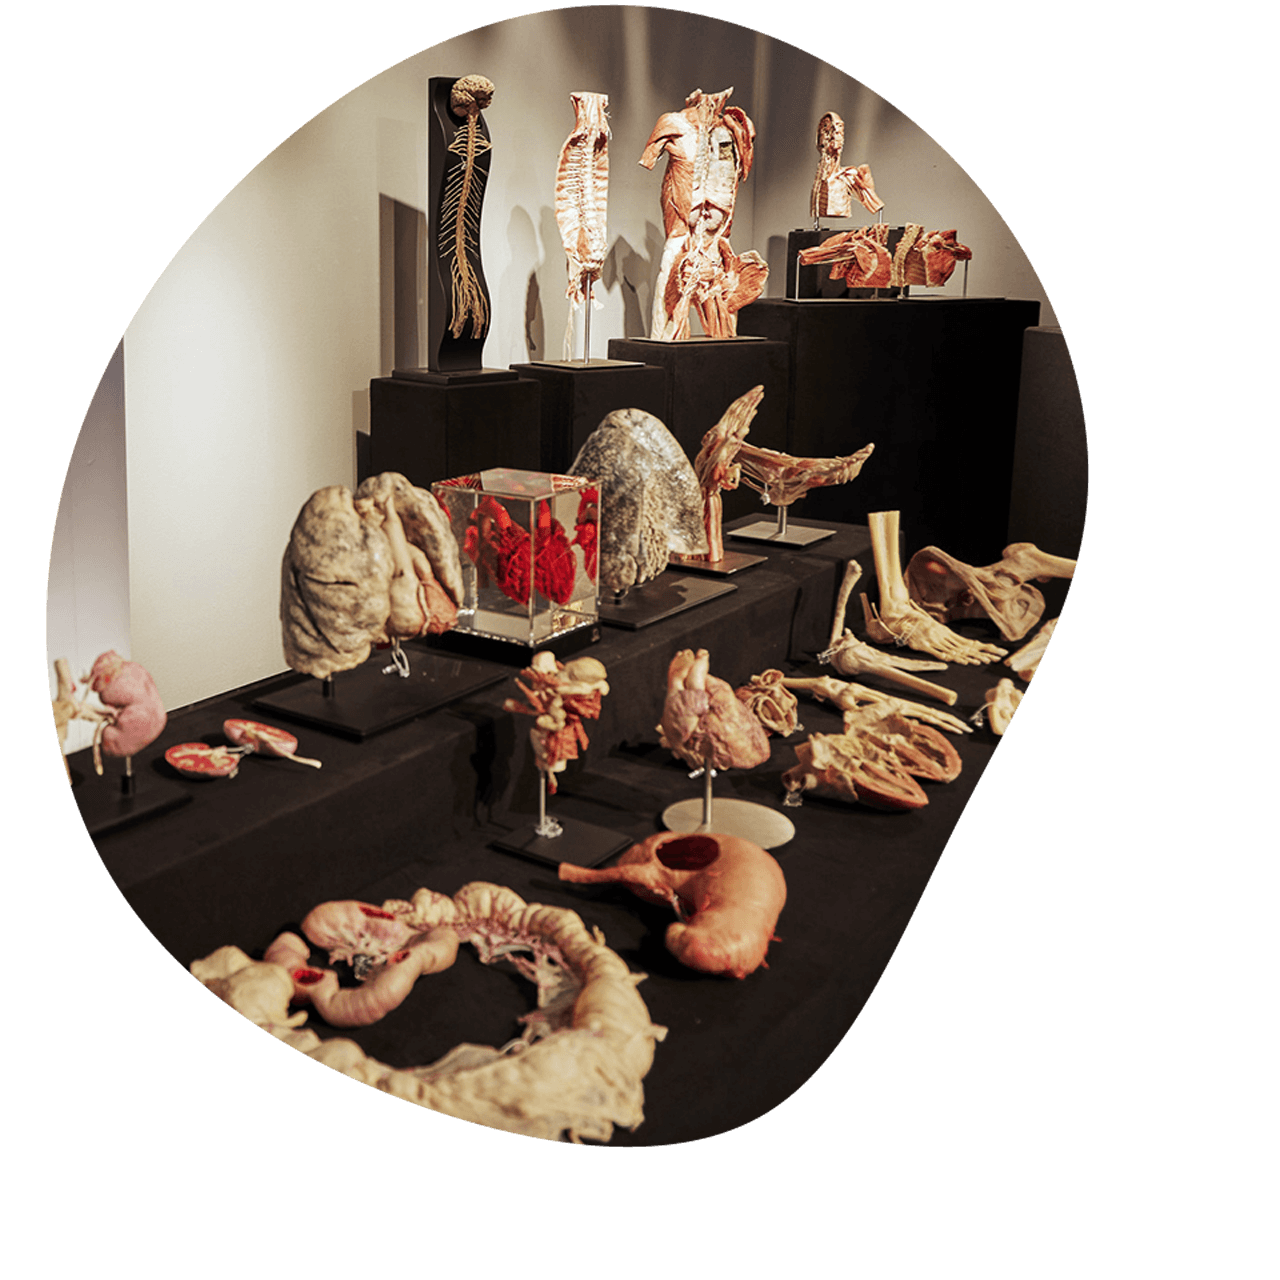 A variety of plastinated human specimens laid out on a table with a black cloth